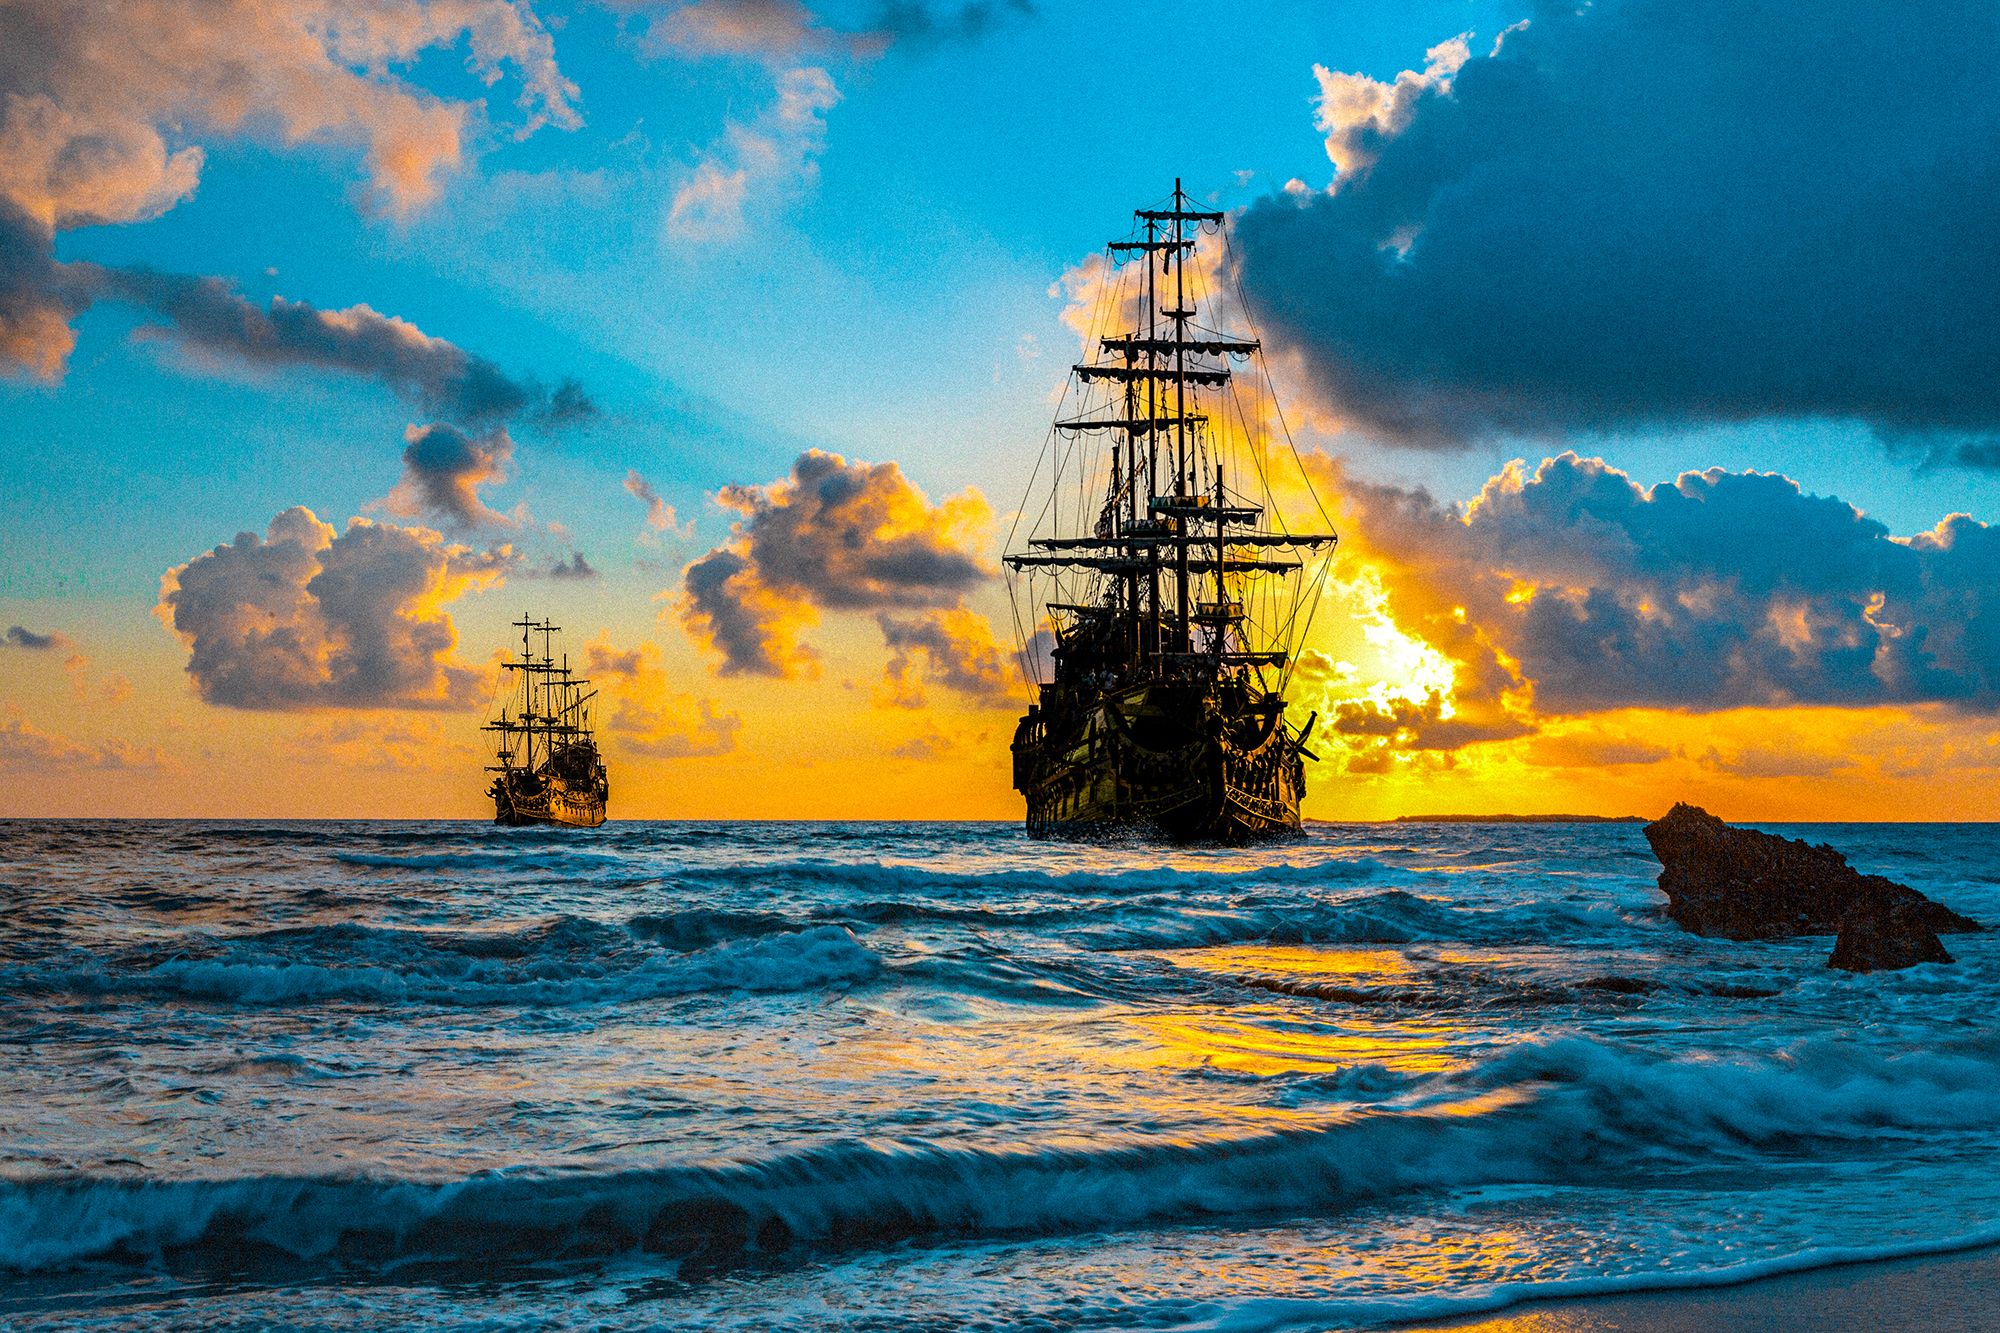 The Pirate King: The Incredible Story of the Real Captain Morgan